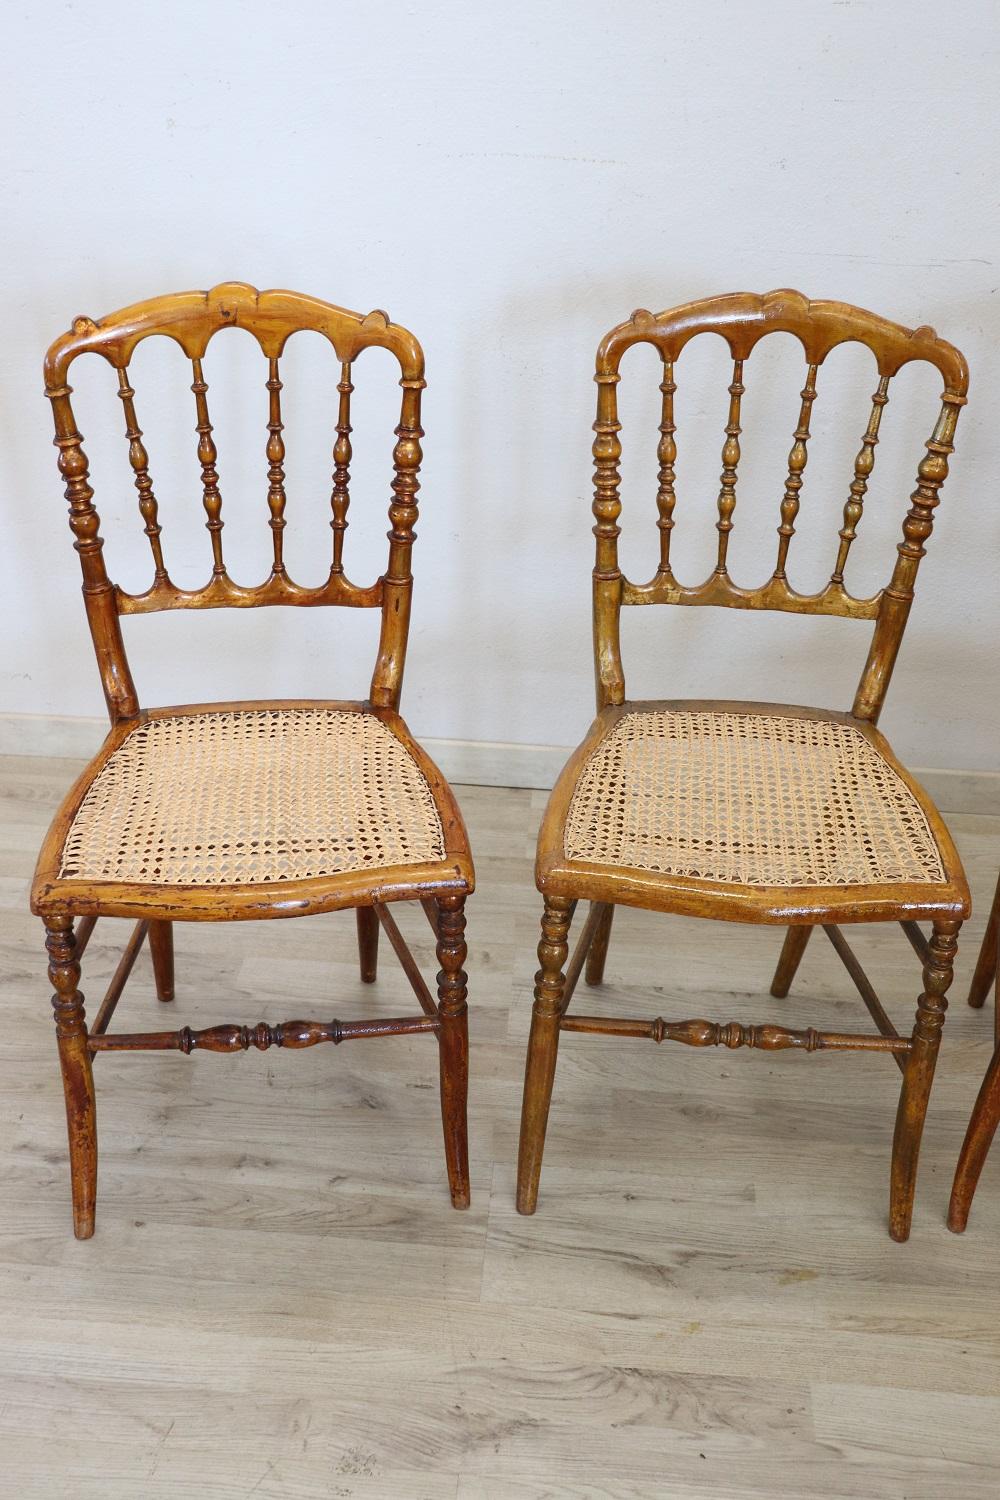 Very nice series of five chairs production of Chiavari Italy cabinetmakers laboratories. All the chairs you see on sale are antique 1890s made of turned wood. The seat is in Vienna straw. The chairs were originally gilded. During a restoration the